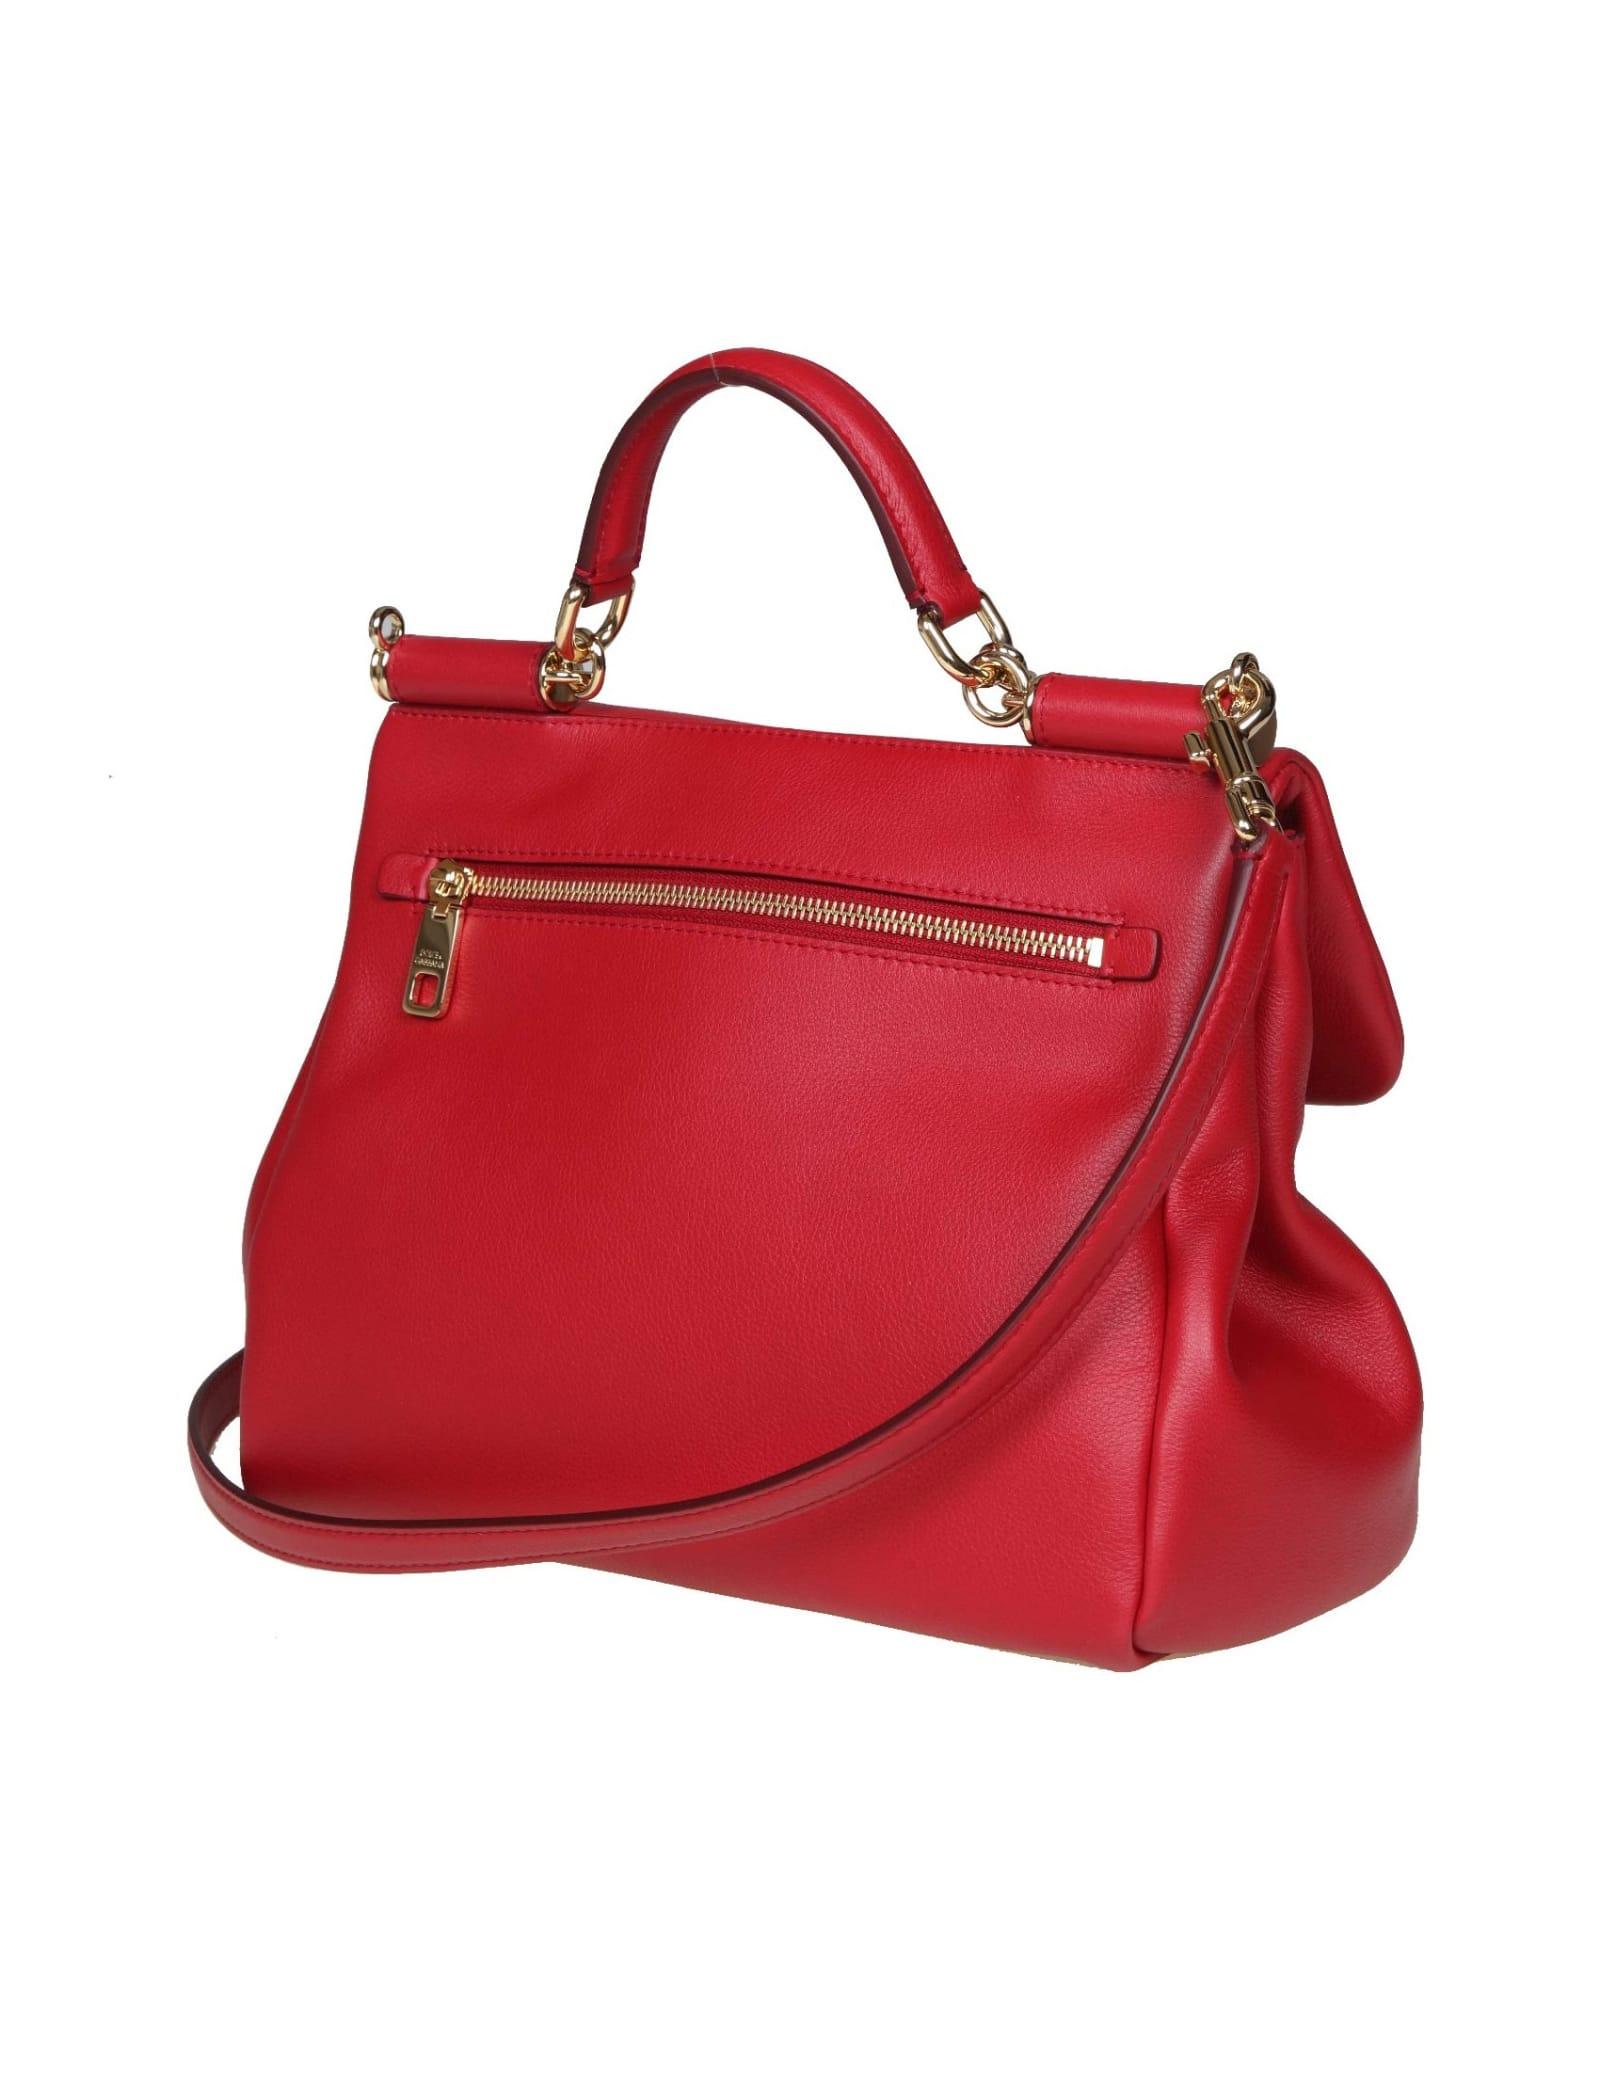 Dolce & Gabbana Handbag In Soft Leather in Red | Lyst